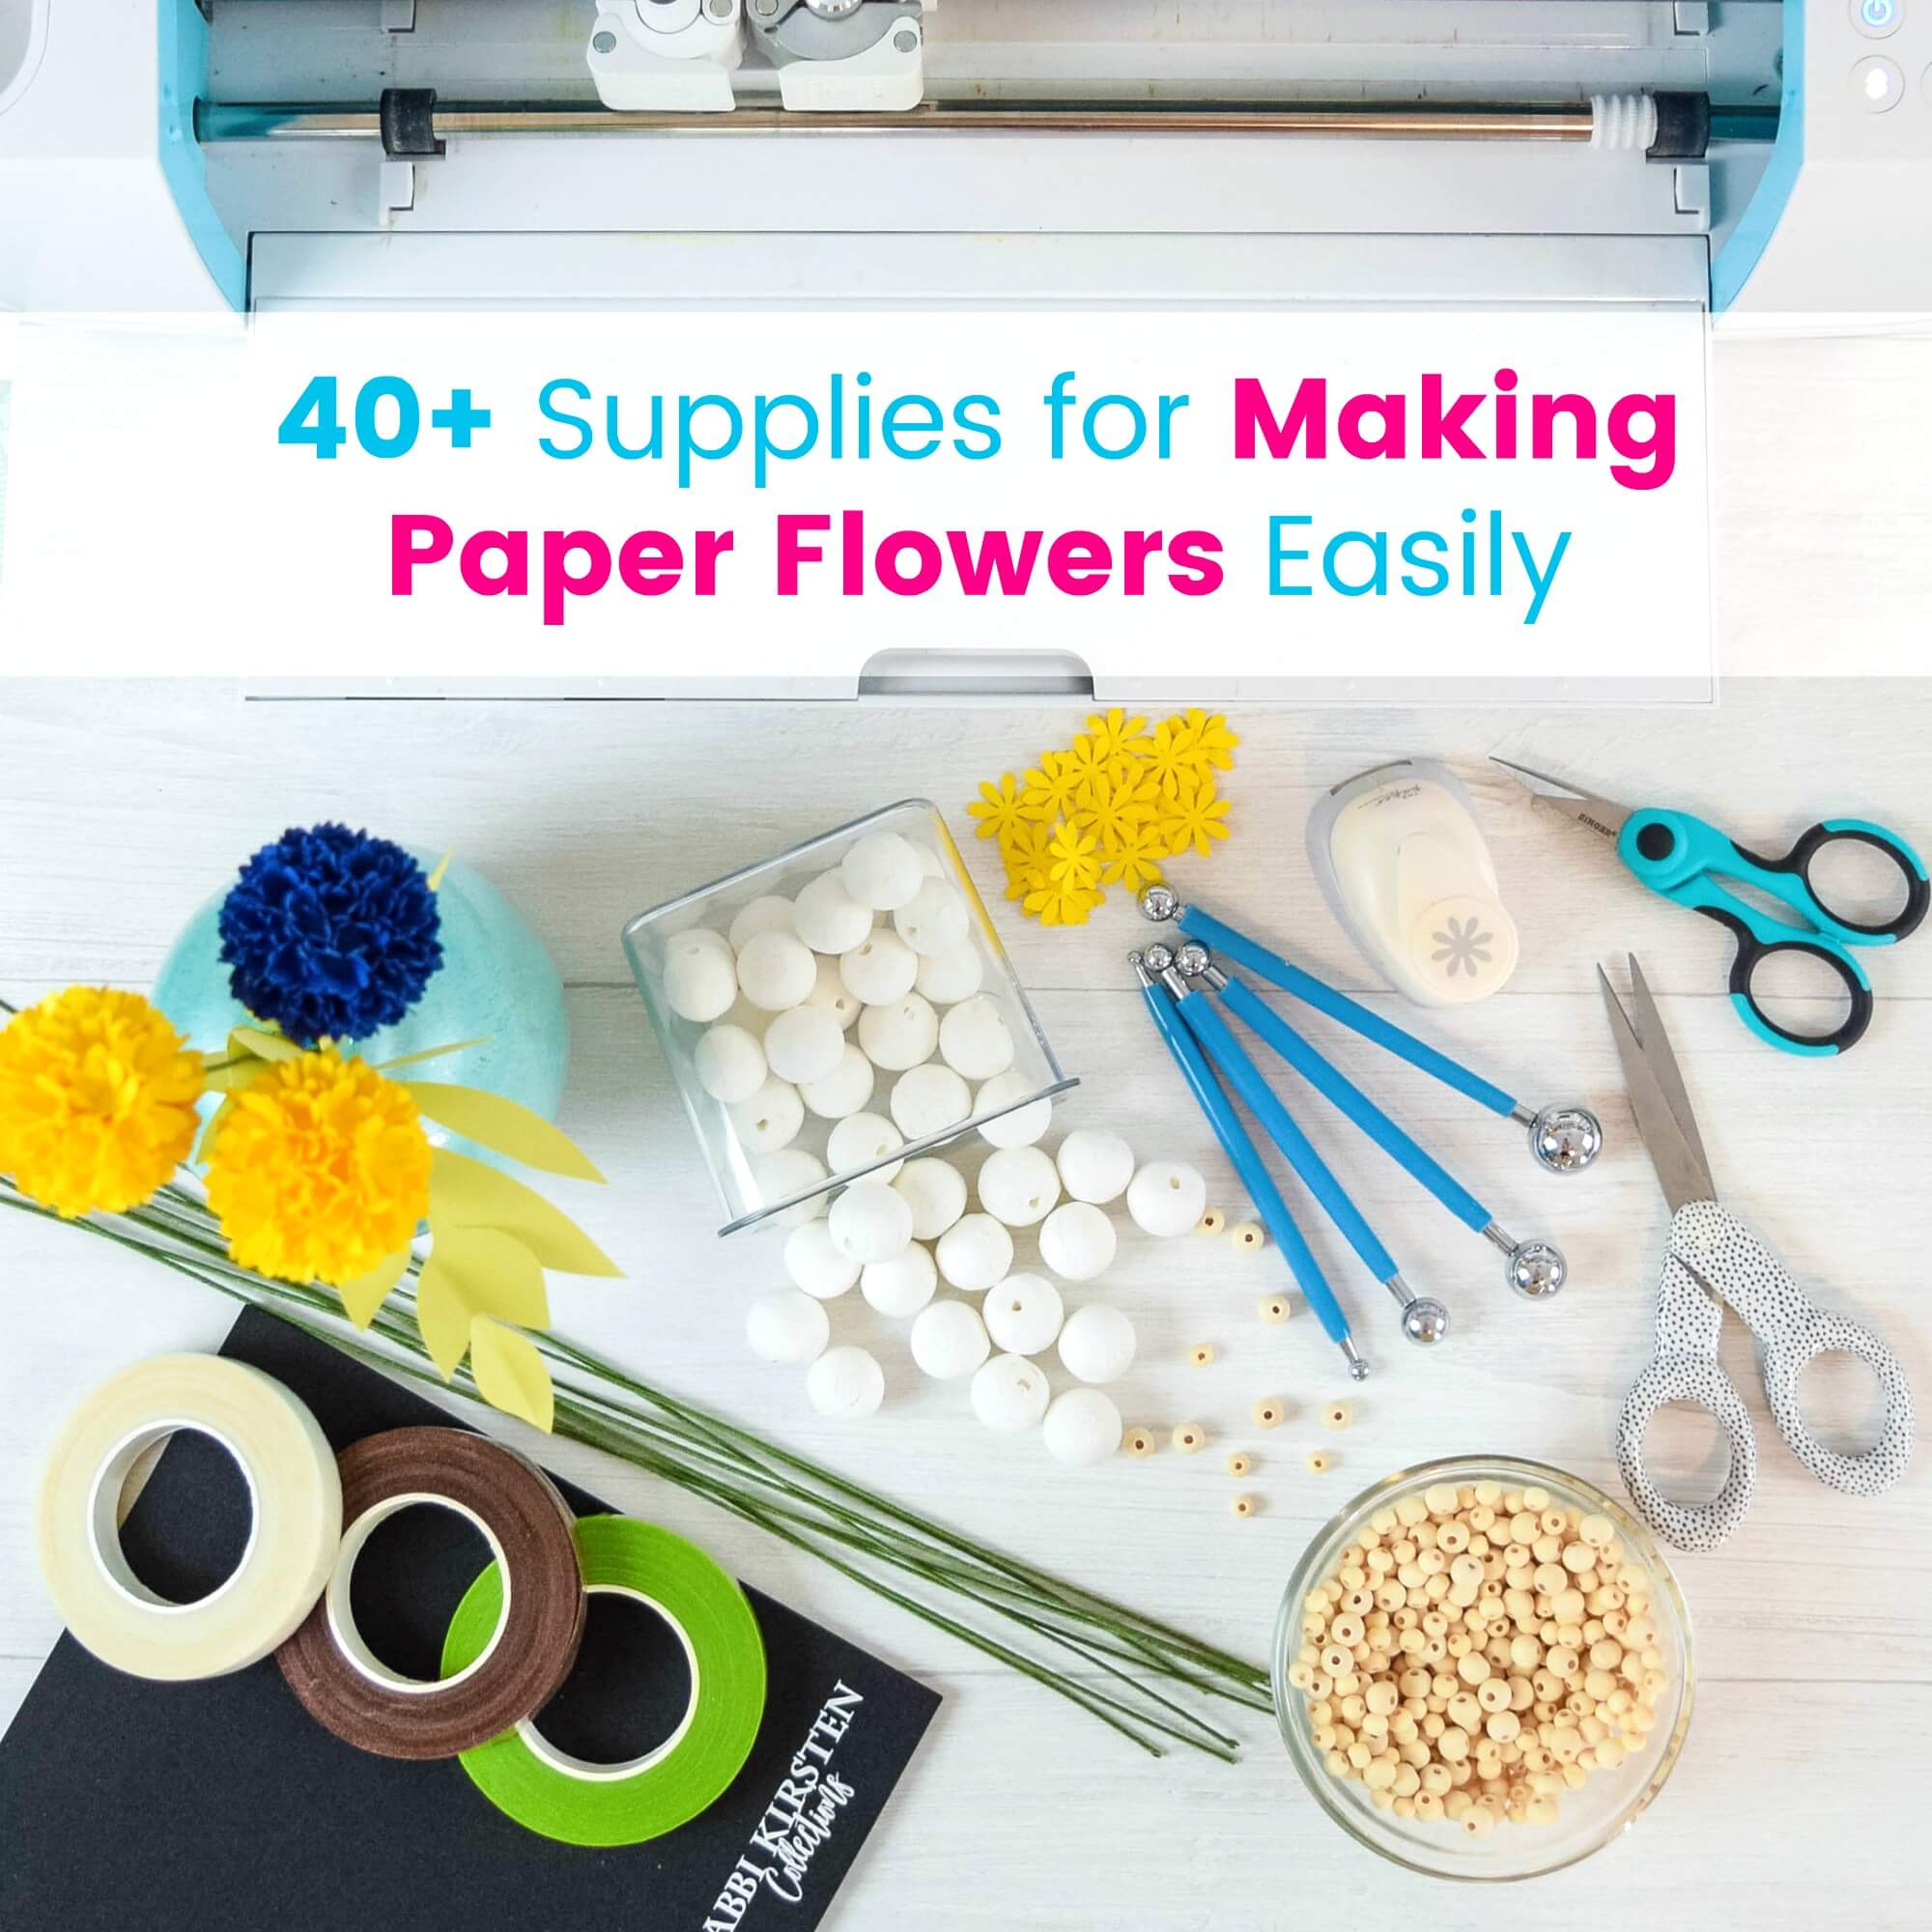 DIY Paper Flower Supplies: Step-by-Step Guide to Crafting Realistic Blooms